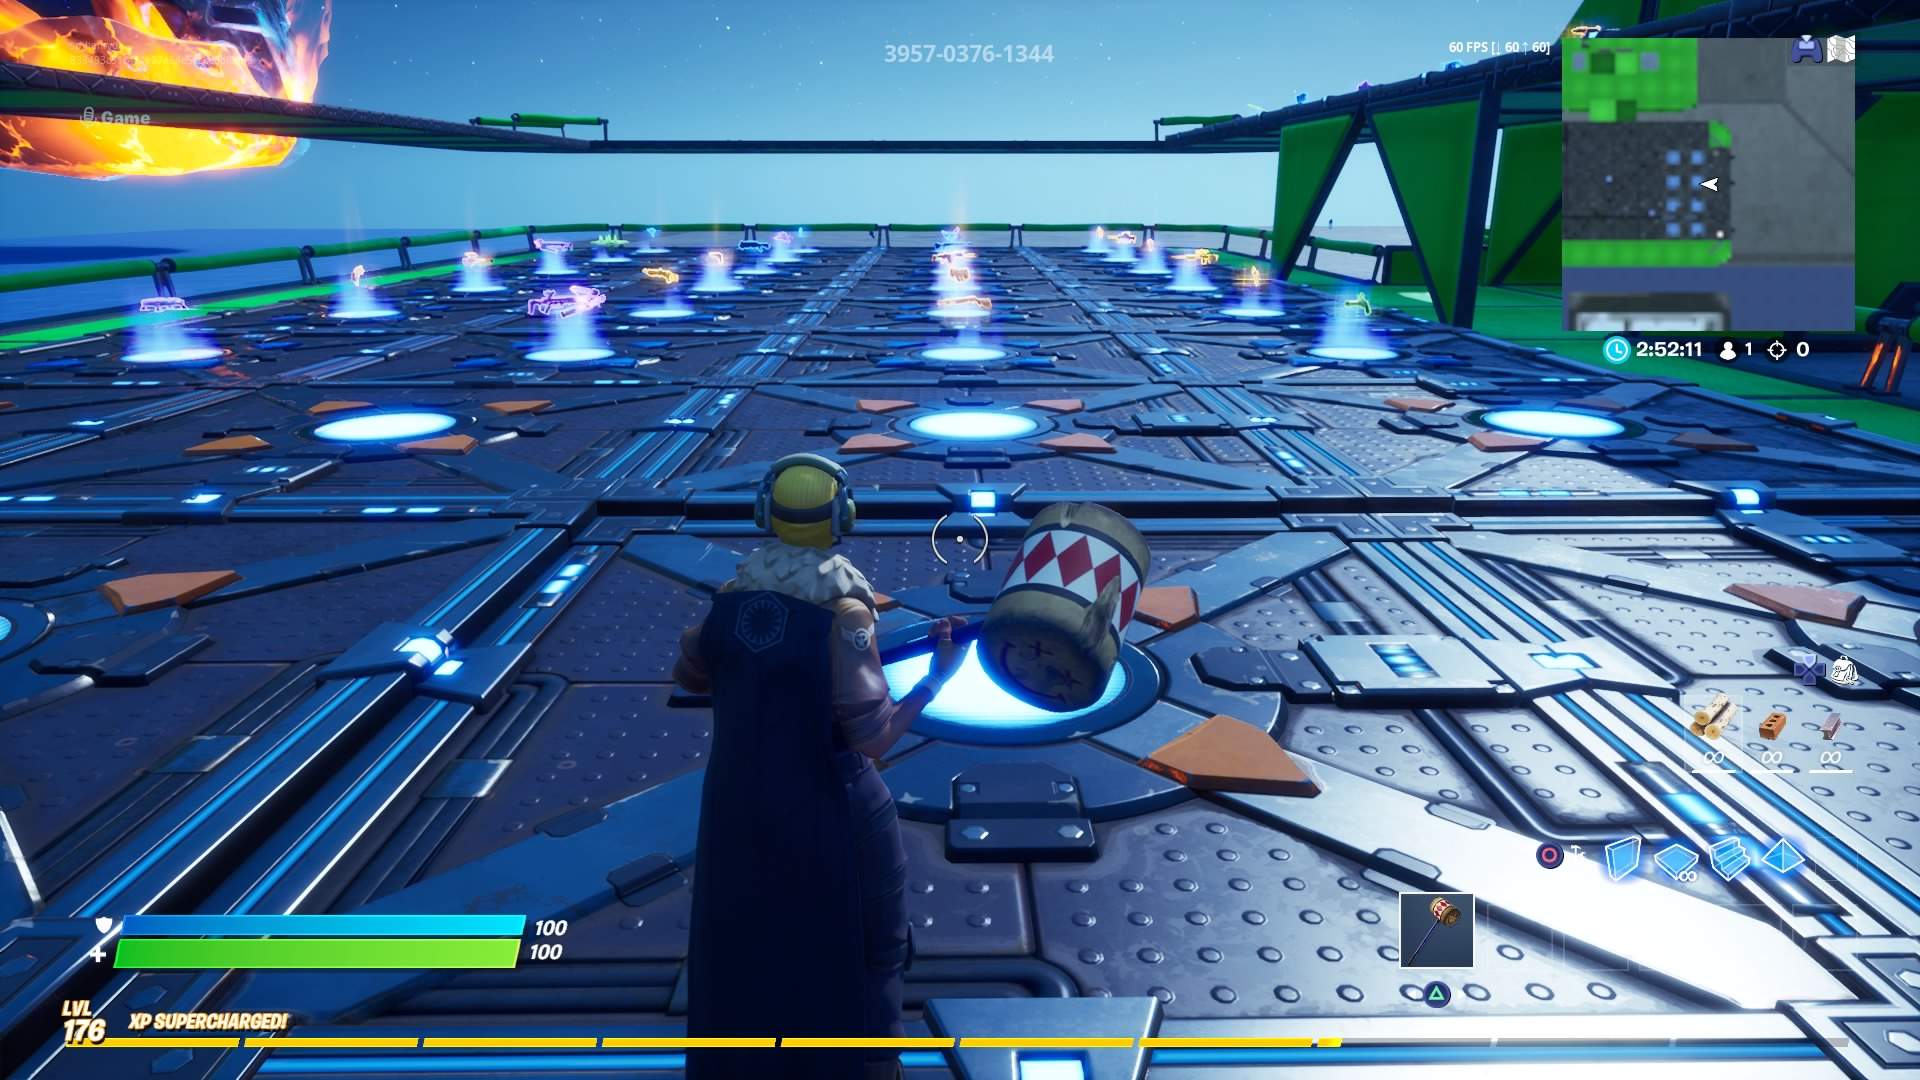 1V1 ARENA WITH ANY GUN